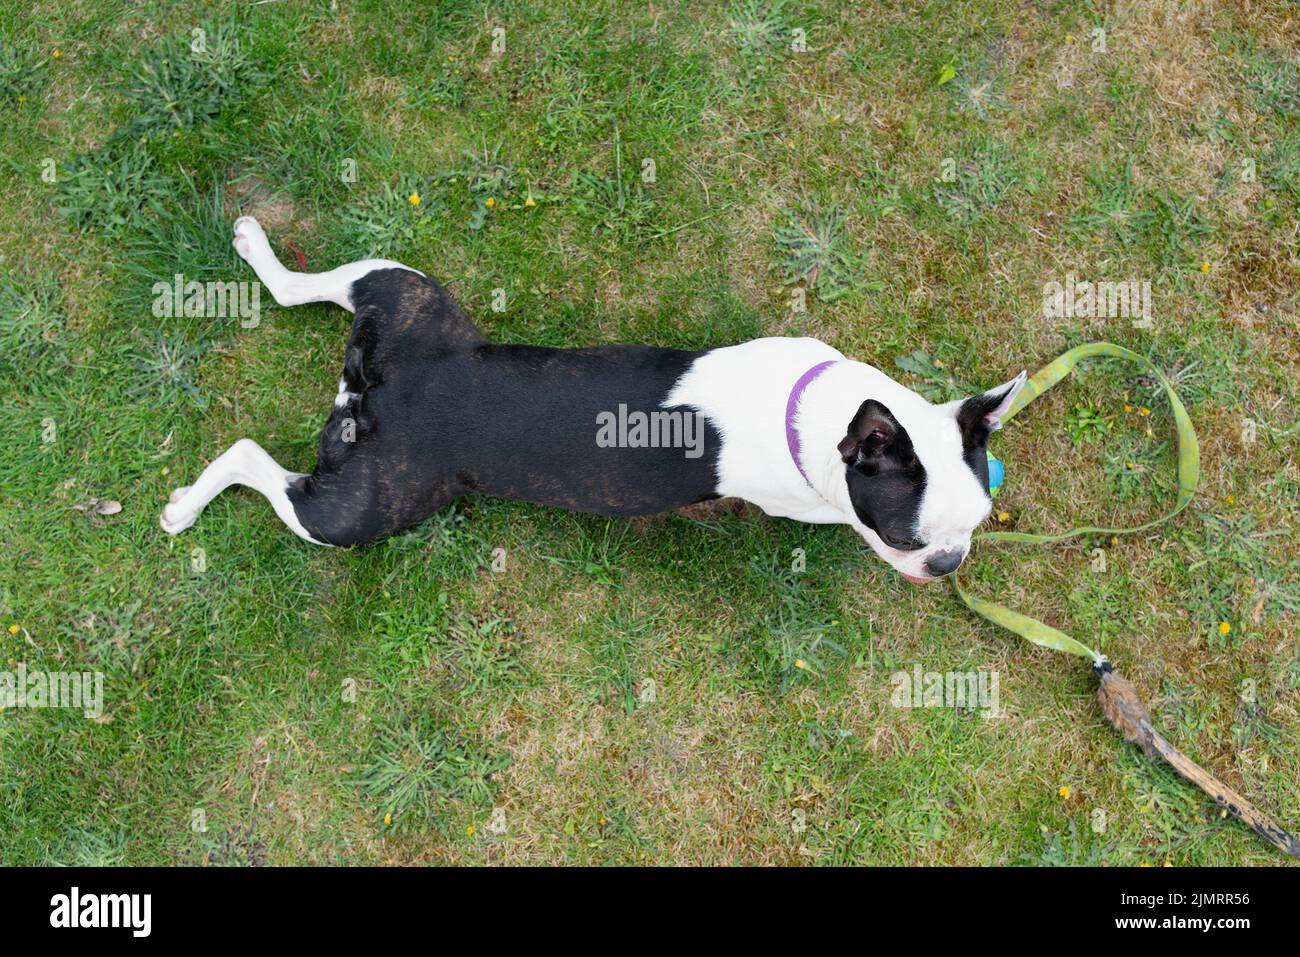 Shallow focus on a Boston Terrier dog lying flat on grass. She has her legs out behind her in a 'frogs leg' type shape. Stock Photo